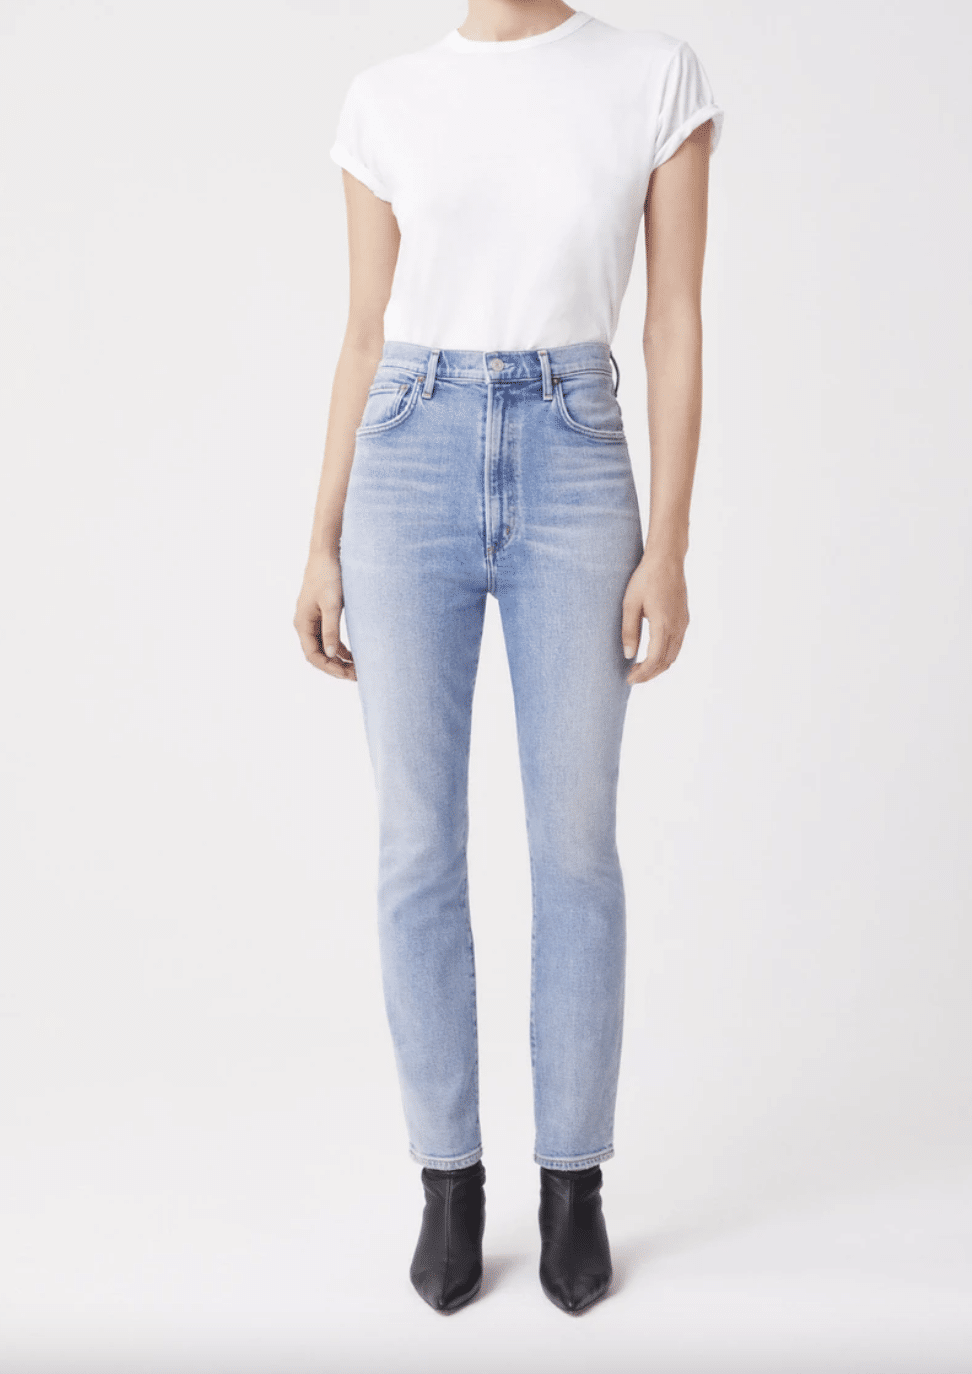 Reasons Why You NEED Agolde Jeans: Top 9 Pairs to Buy for 2022